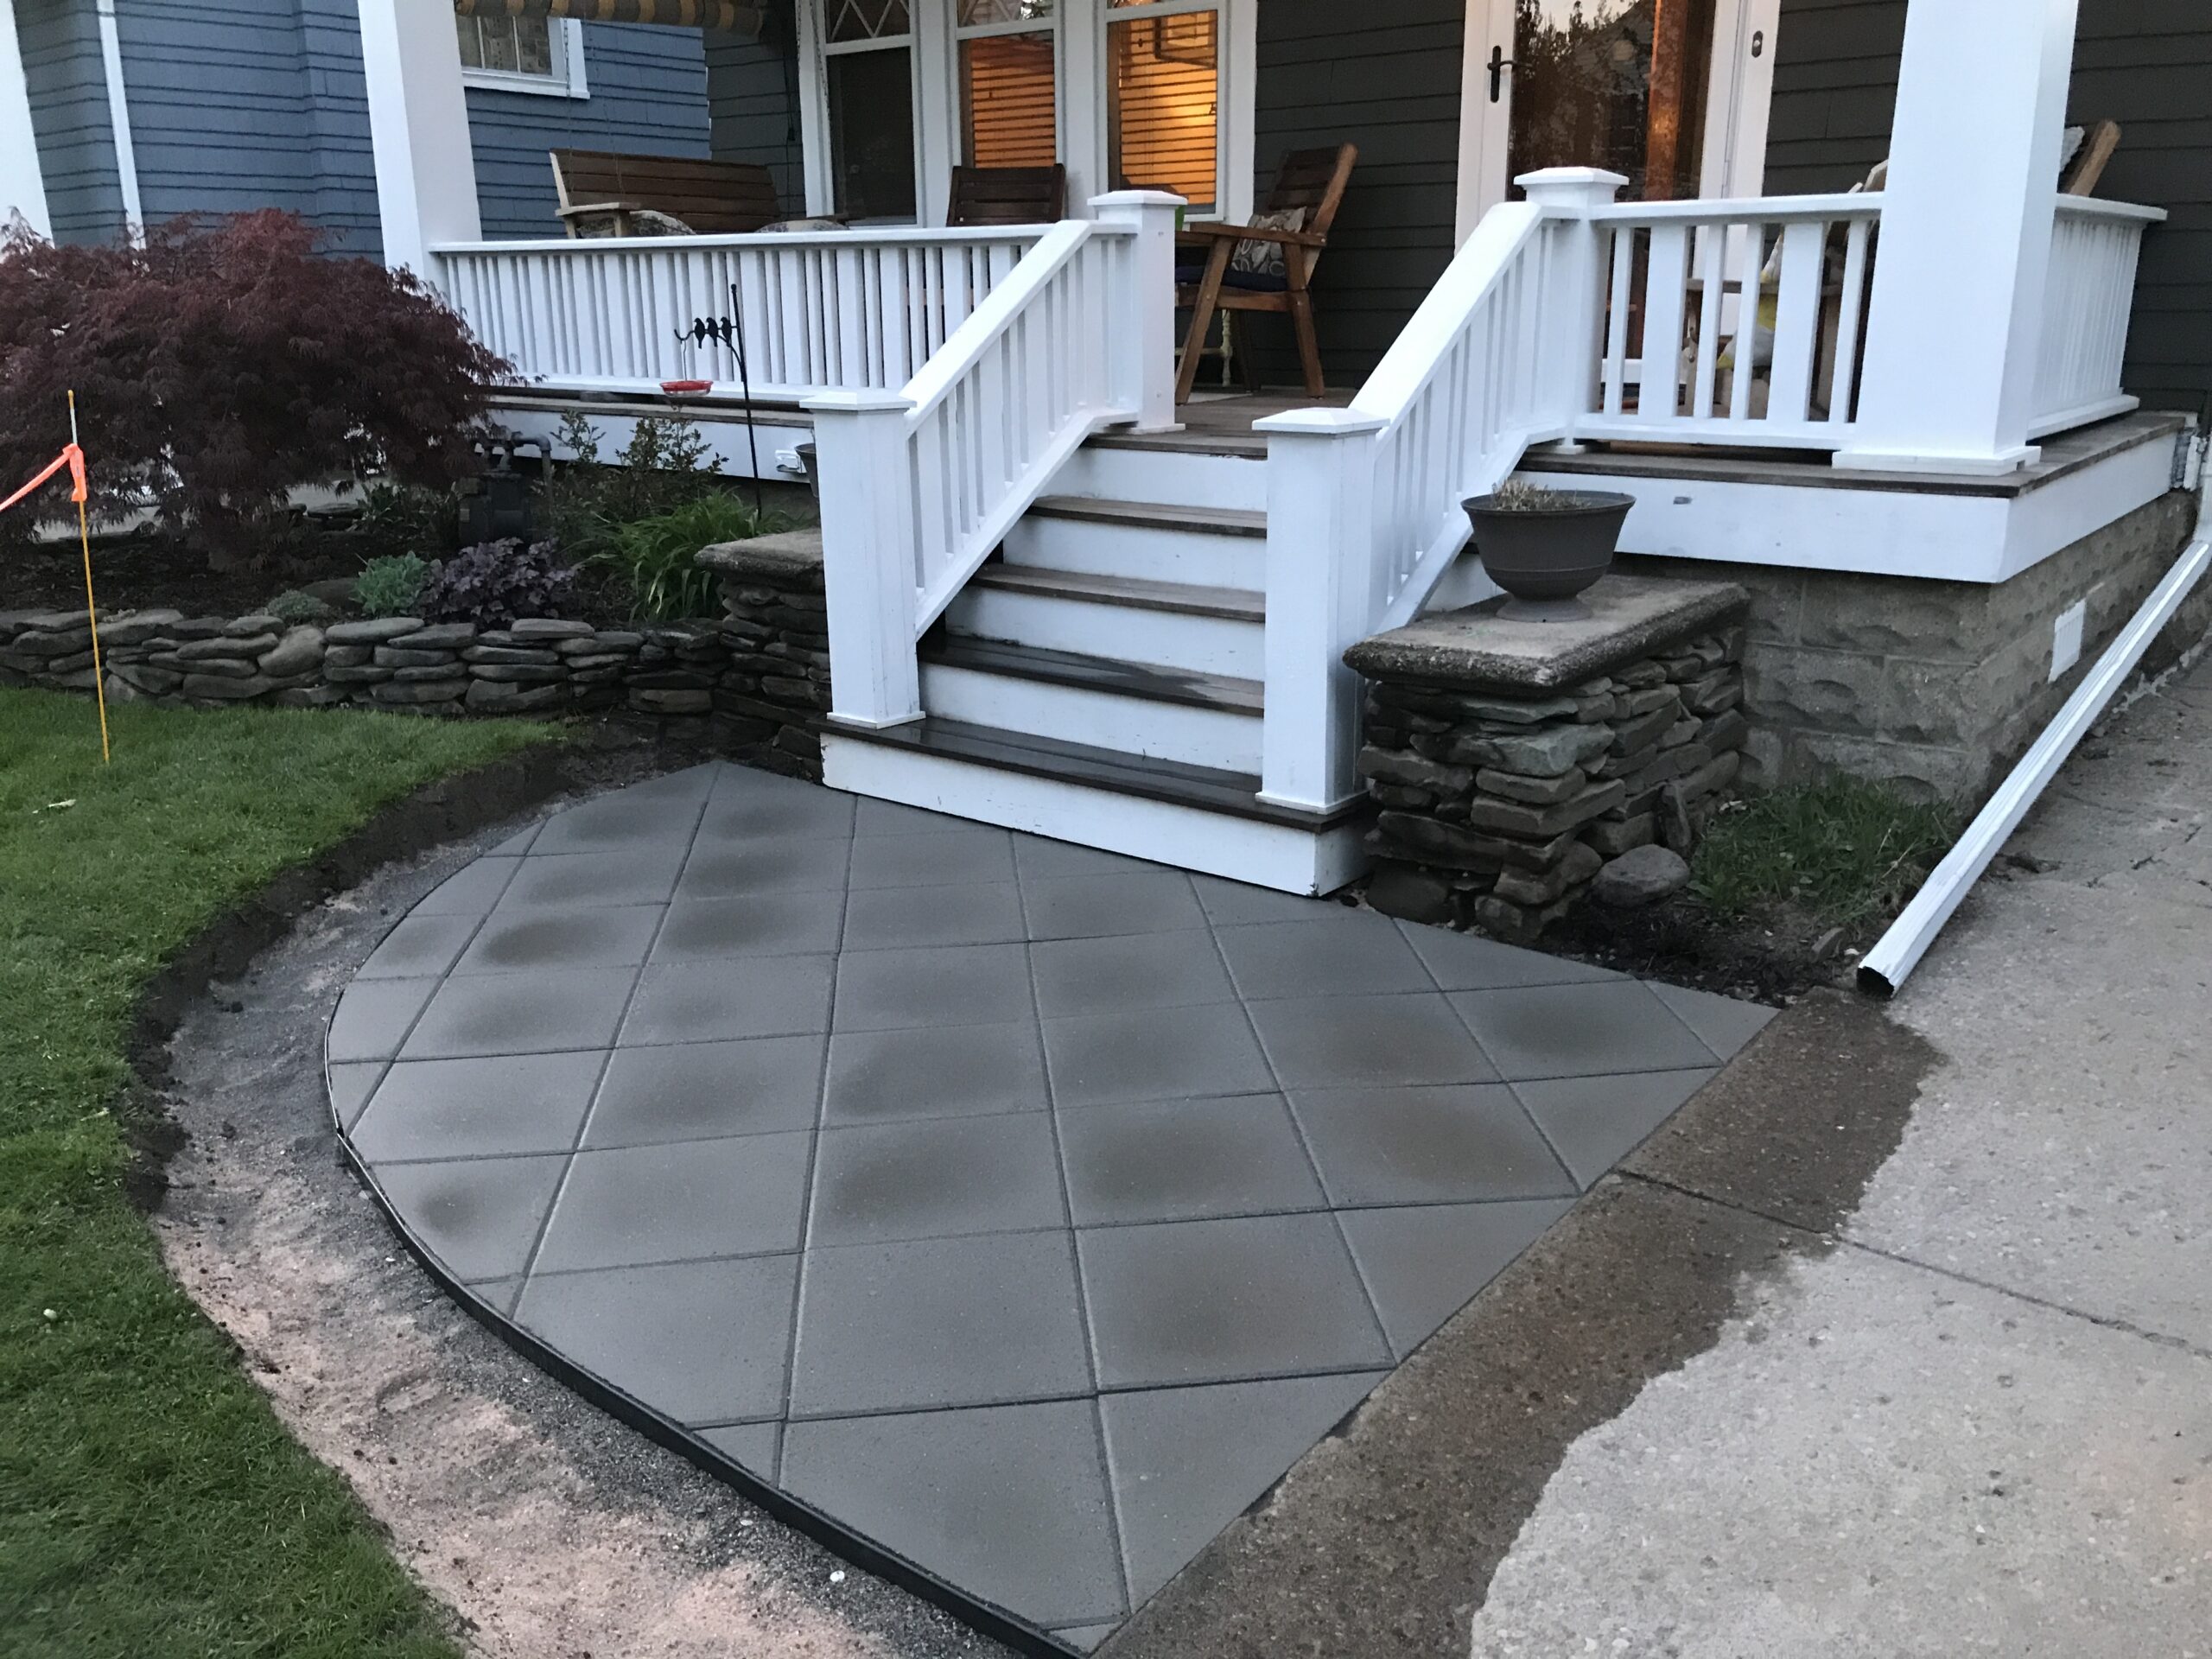 Laying a New Paver Path to the Front Porch